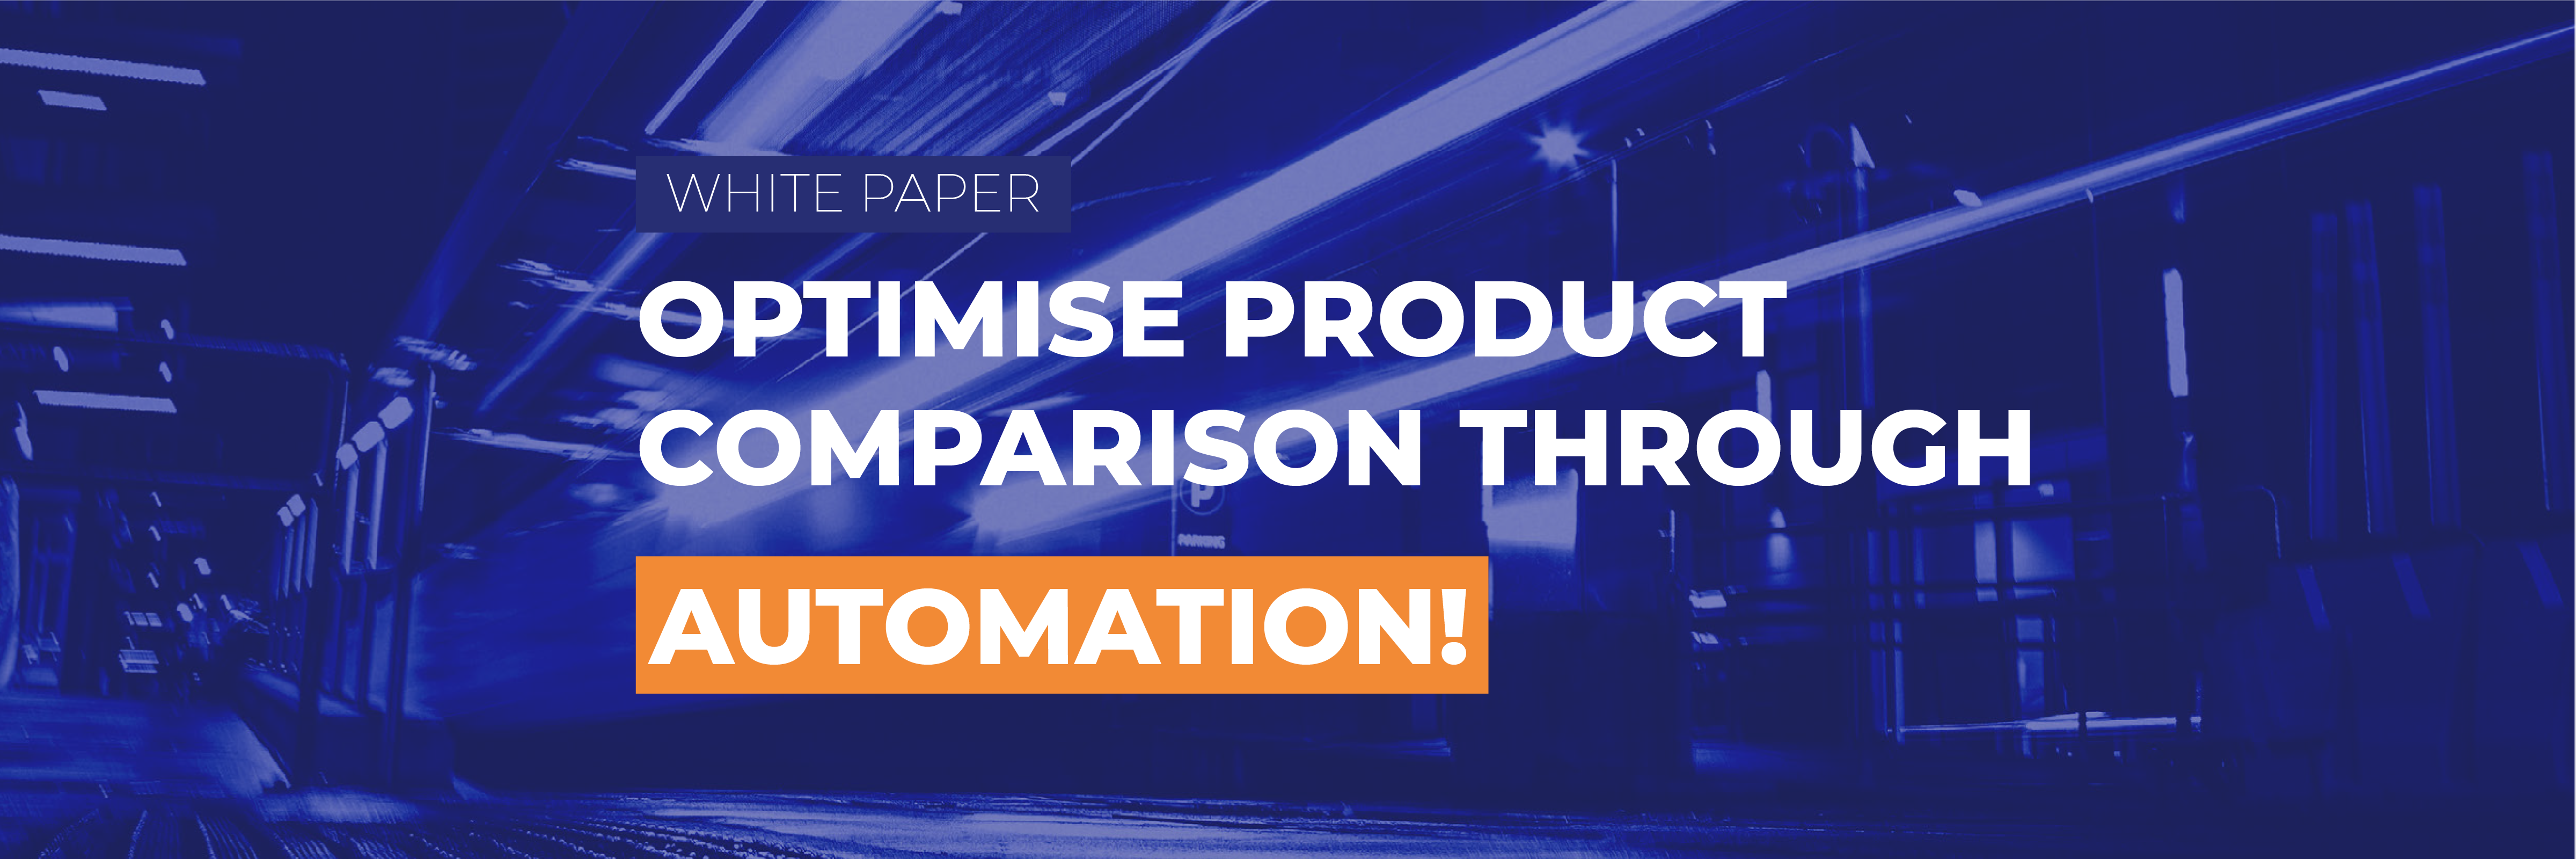 [White Paper] Optimise the comparison of your products through automation!